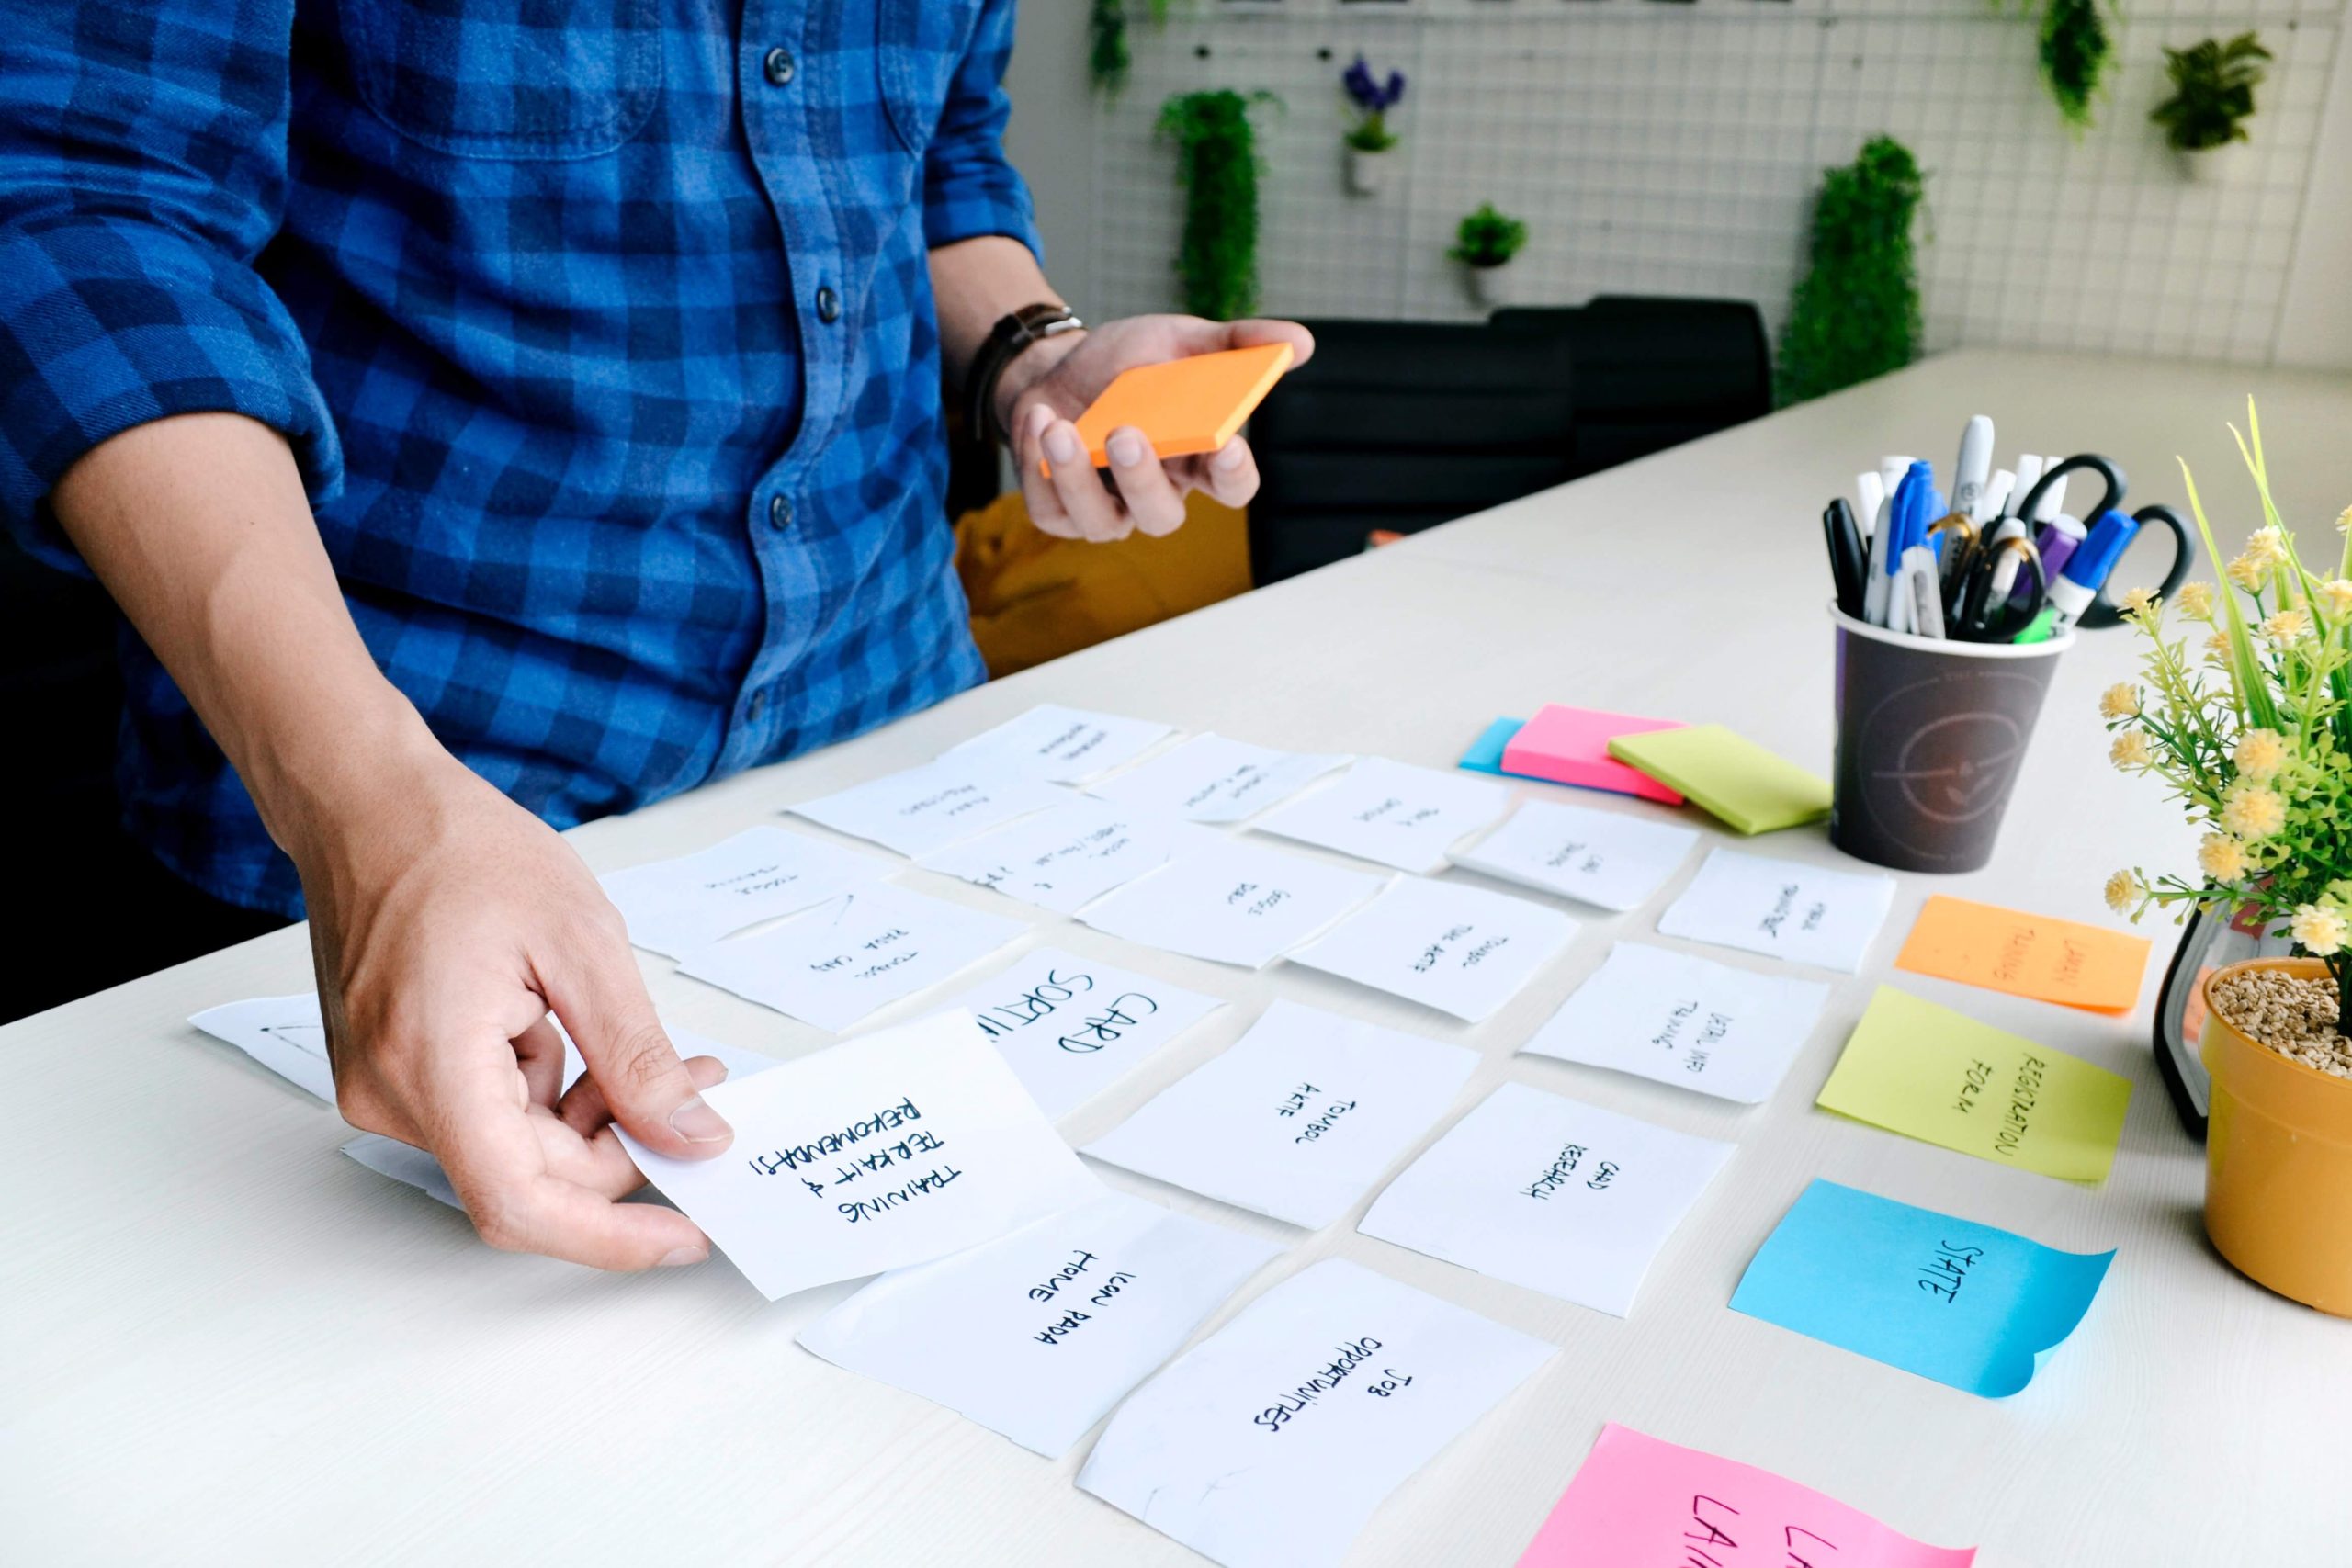 8x Card sorting is a great UX Research Method